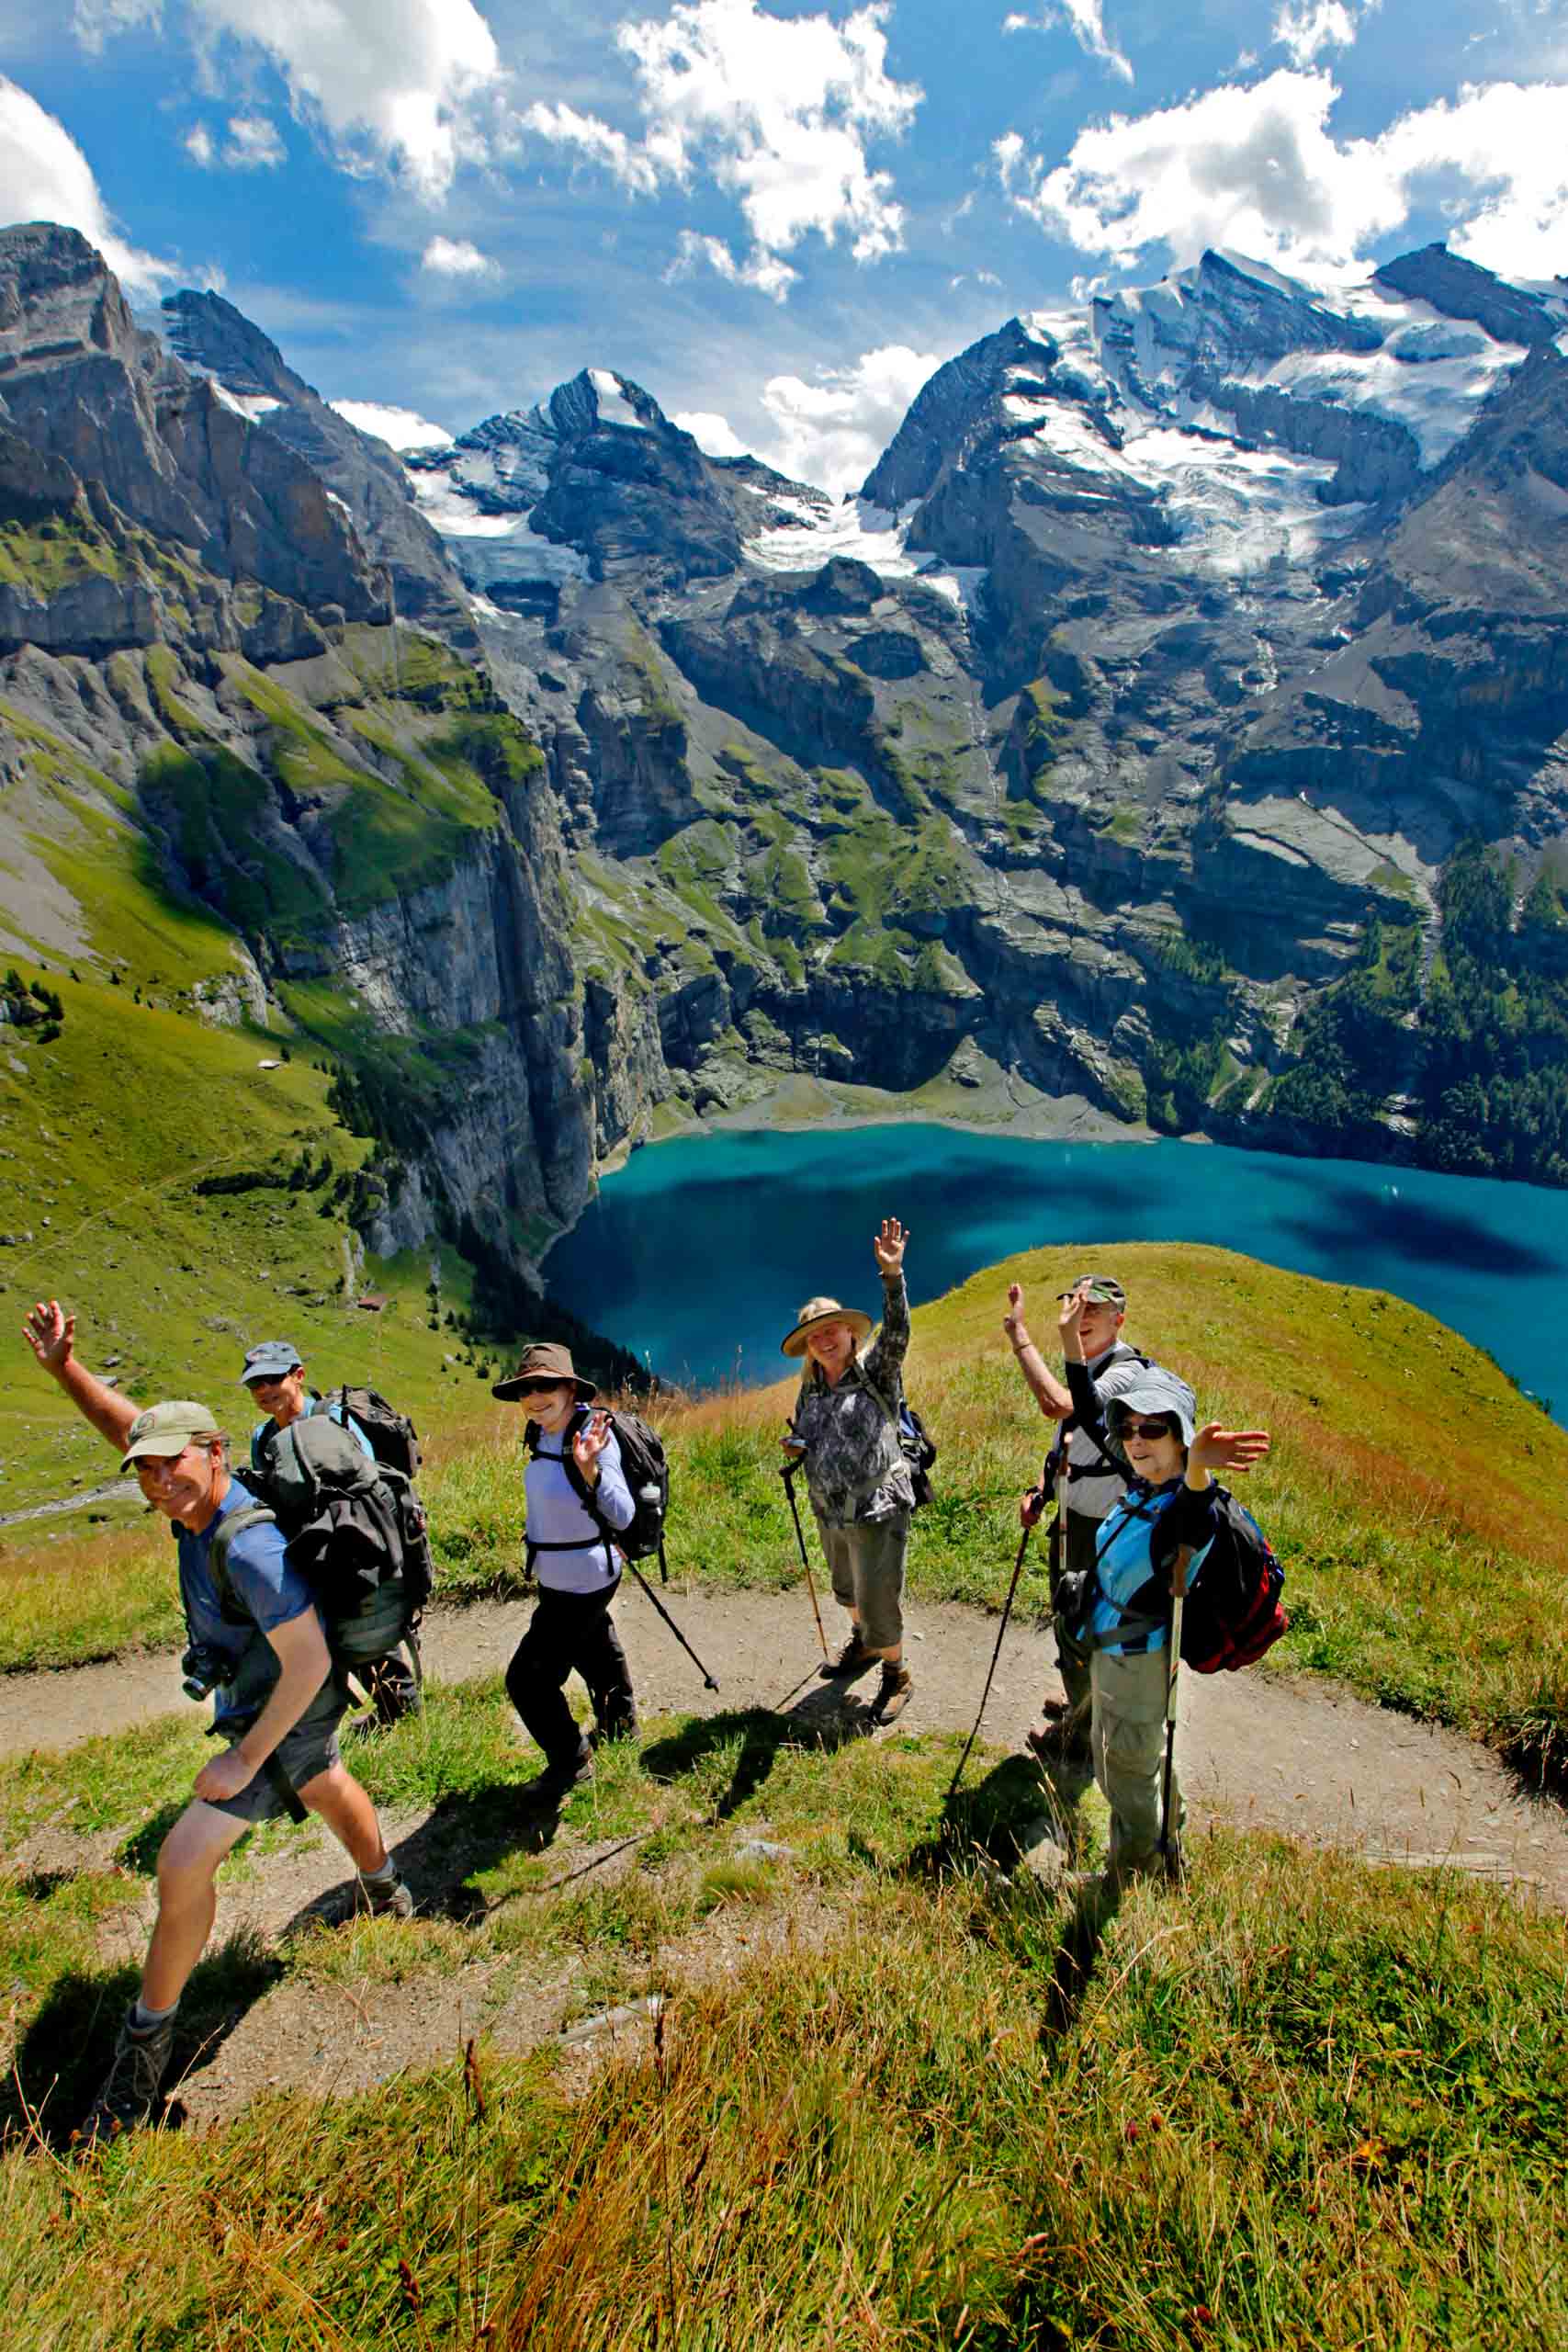 A group of hikers on the Alps with a lake in the background.